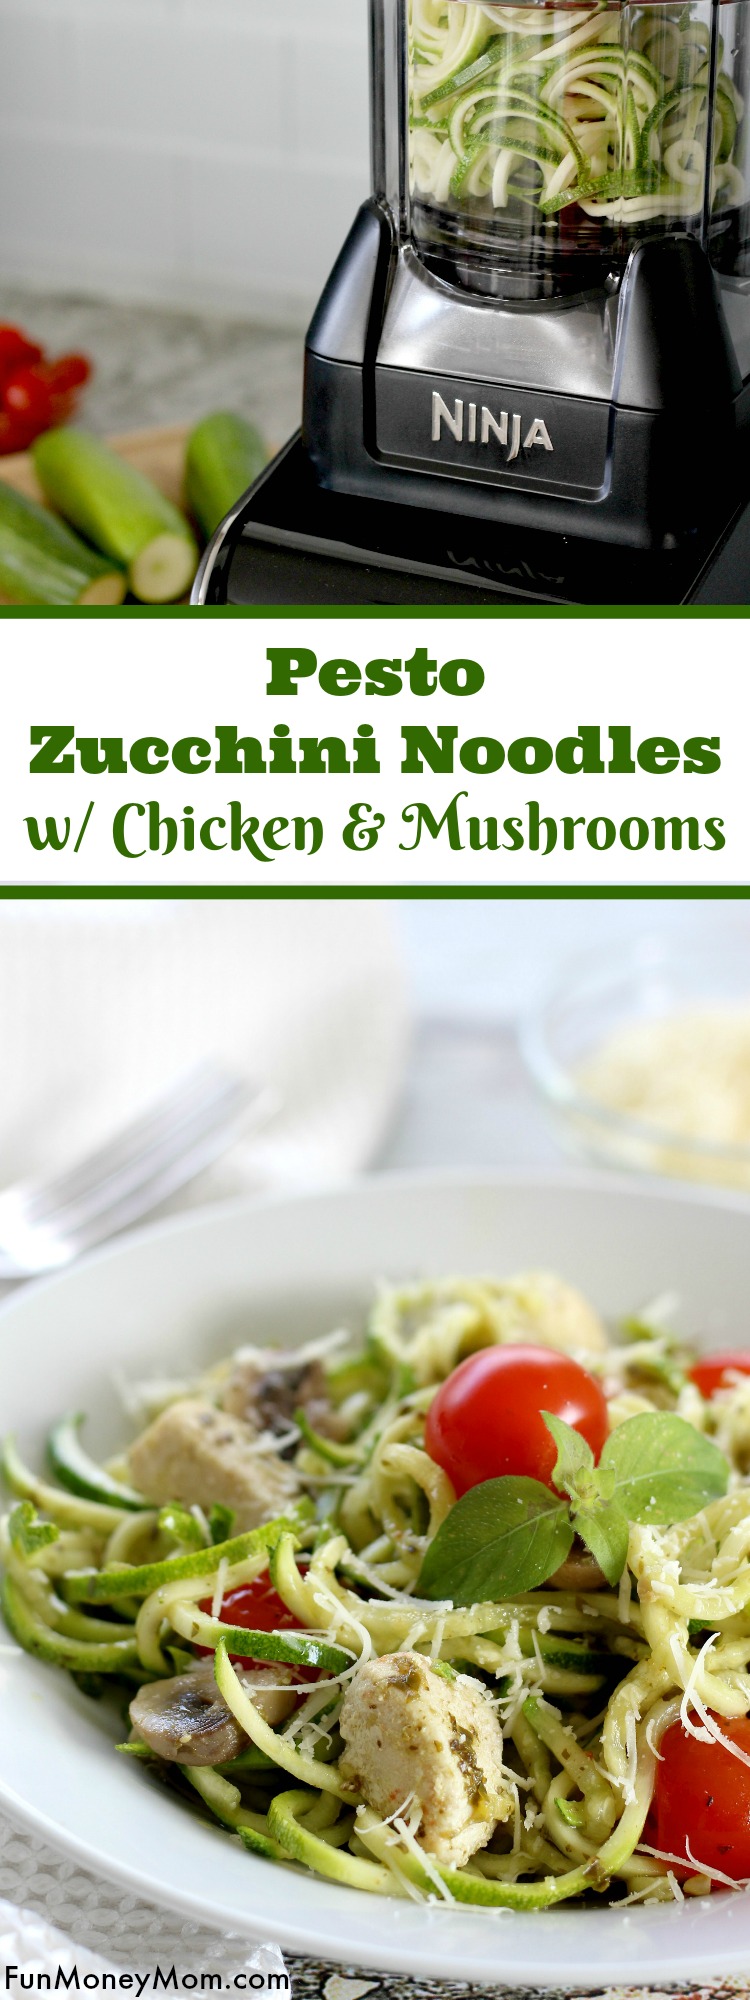 Looking for a healthy dinner recipe the entire family will love? The kids will love eating their veggies when you serve these delicious Pesto Zucchini Noodles With Chicken And Mushrooms.